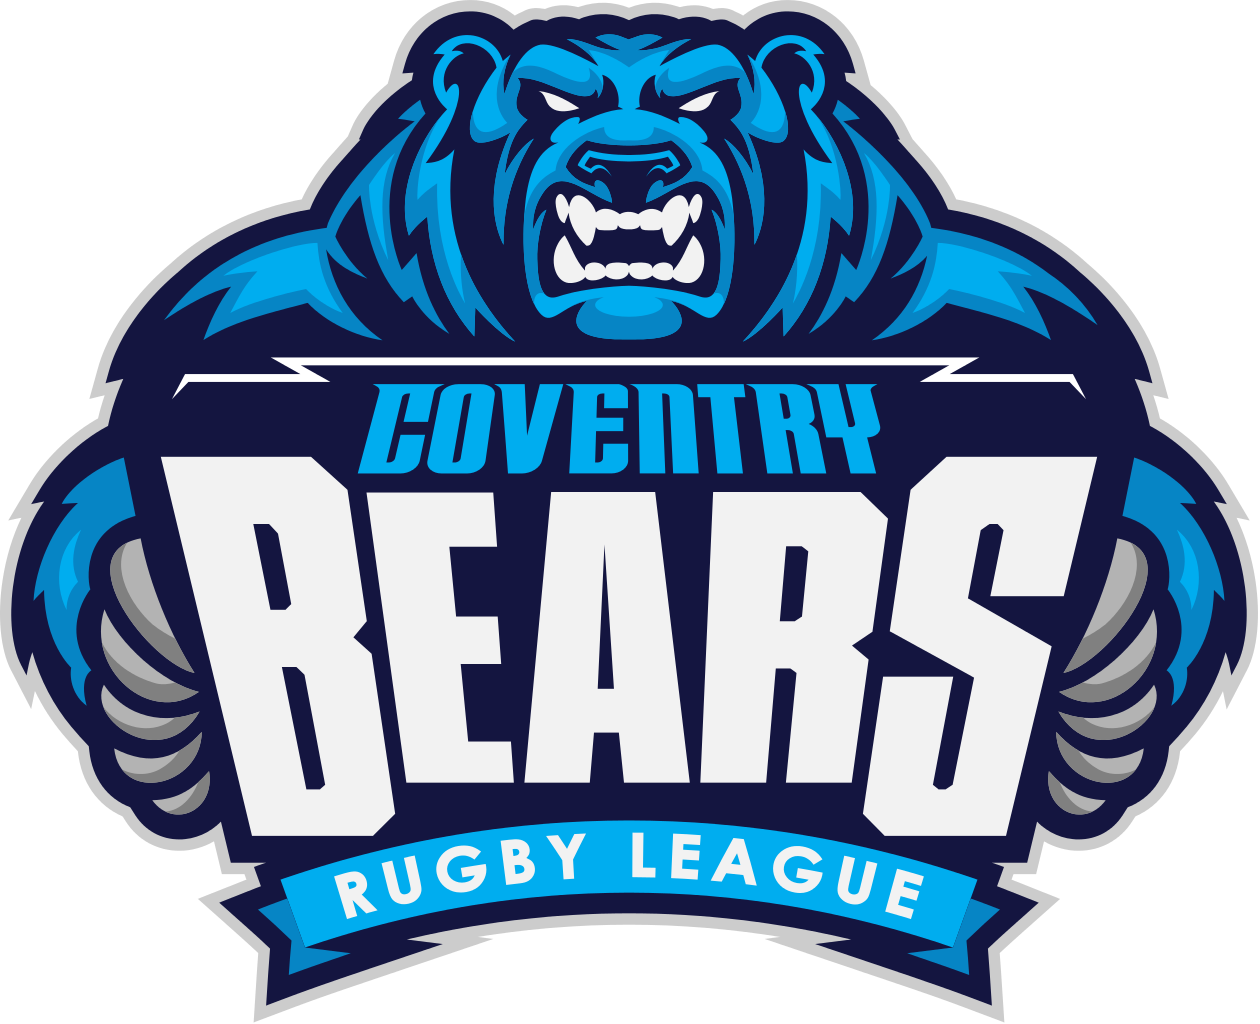 Two more sign up for Coventry - Love Rugby League